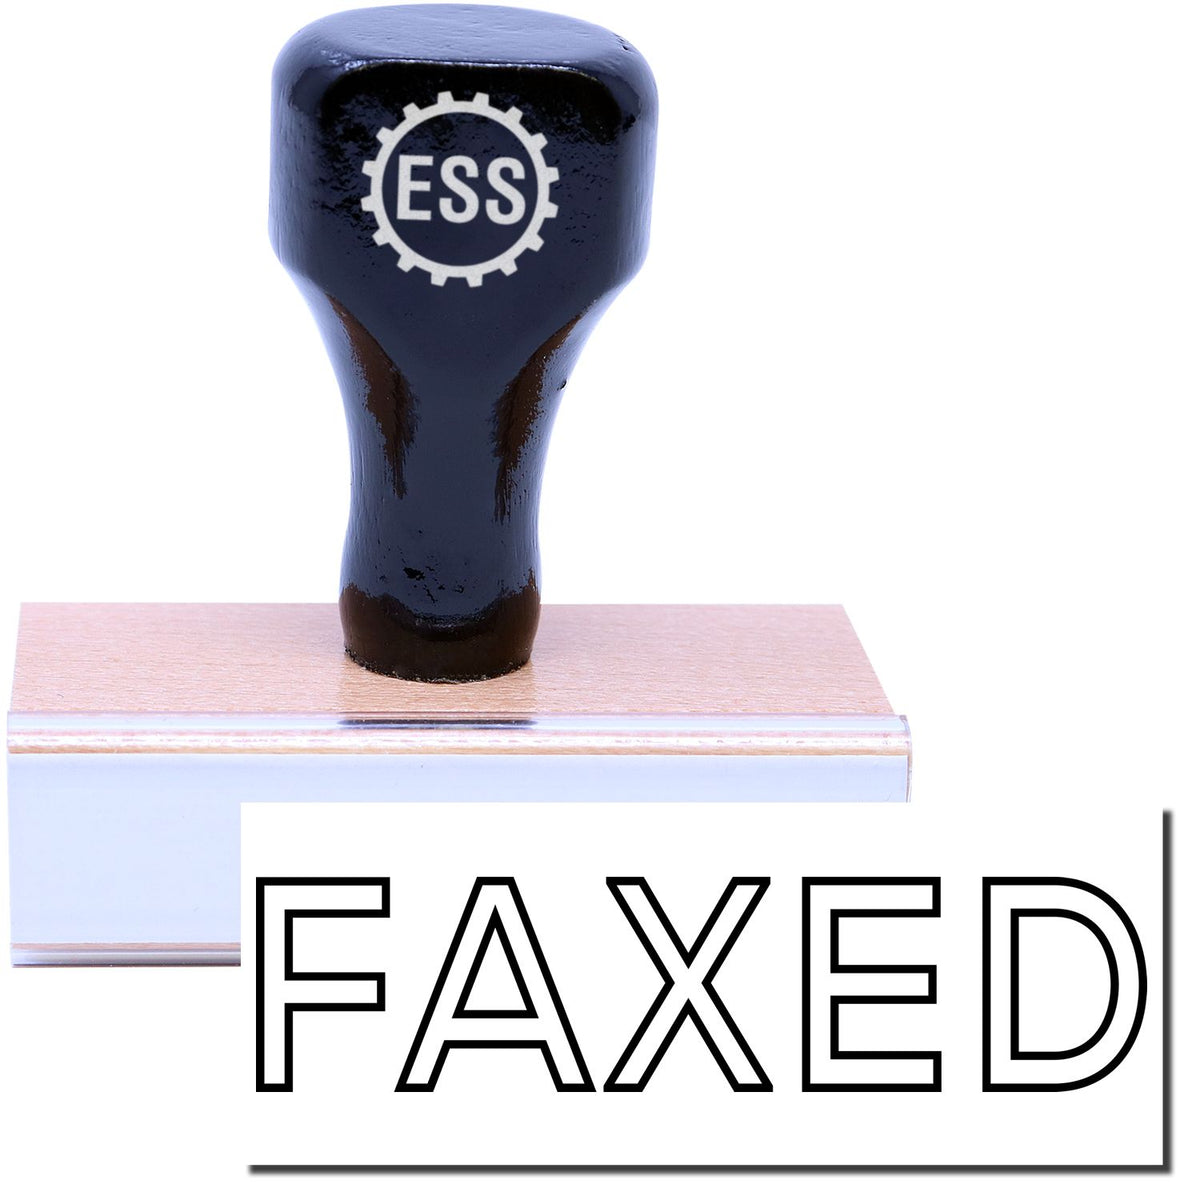 A stock office rubber stamp with a stamped image showing how the text &quot;FAXED&quot; in a large outline font is displayed after stamping.